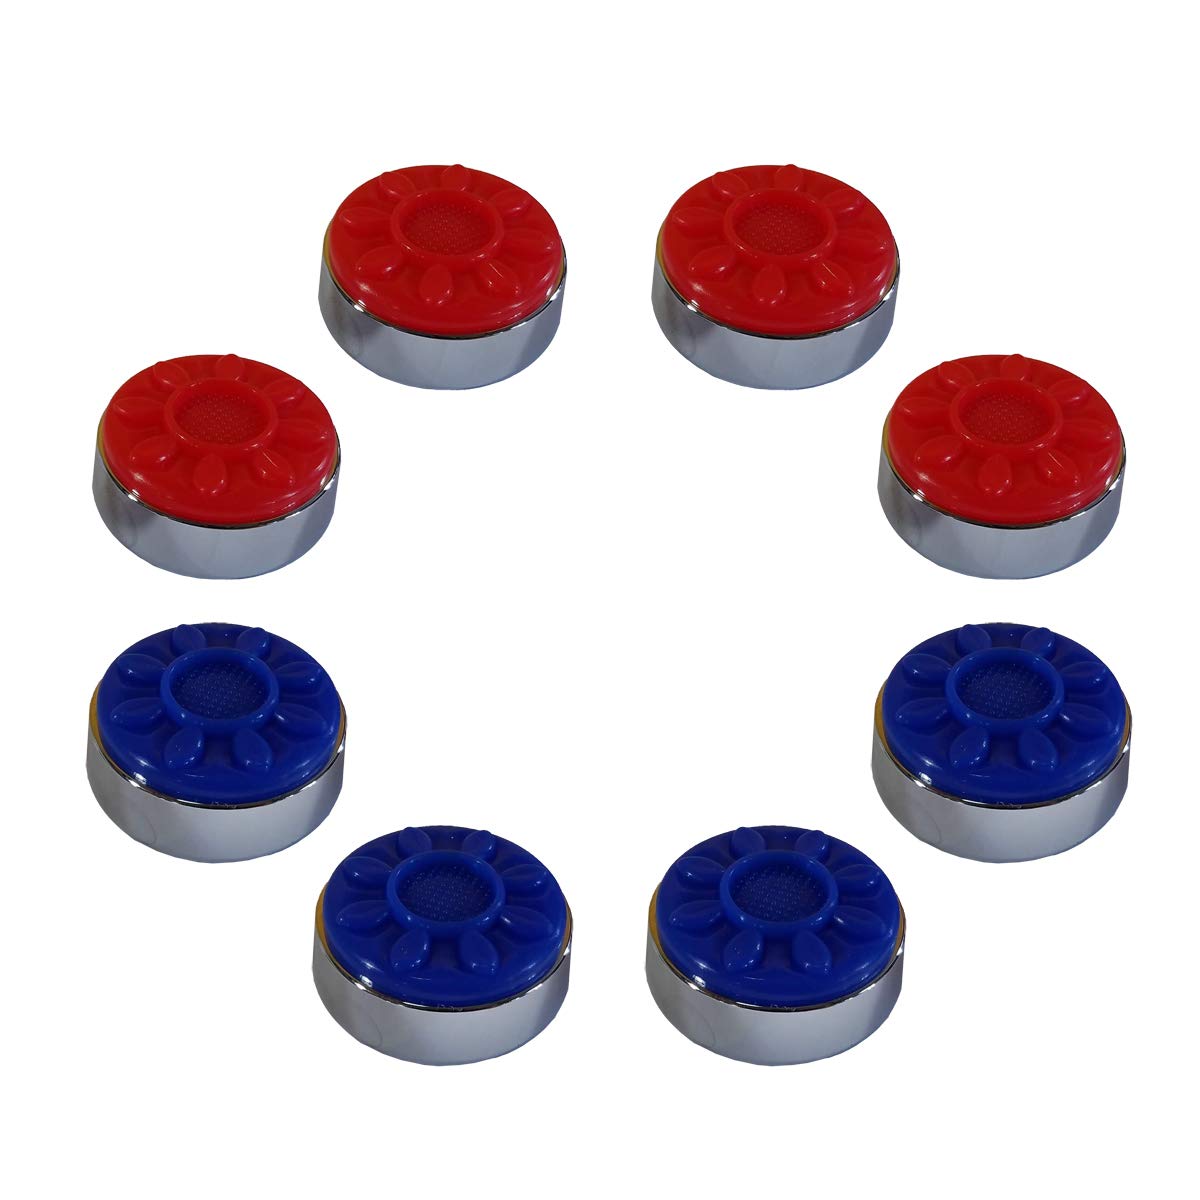 Game Room Guys Premium Chrome-Plated Steel Indoor Shuffleboard Pucks - Set Of 8 (2-516 58Mm Blue & Red)